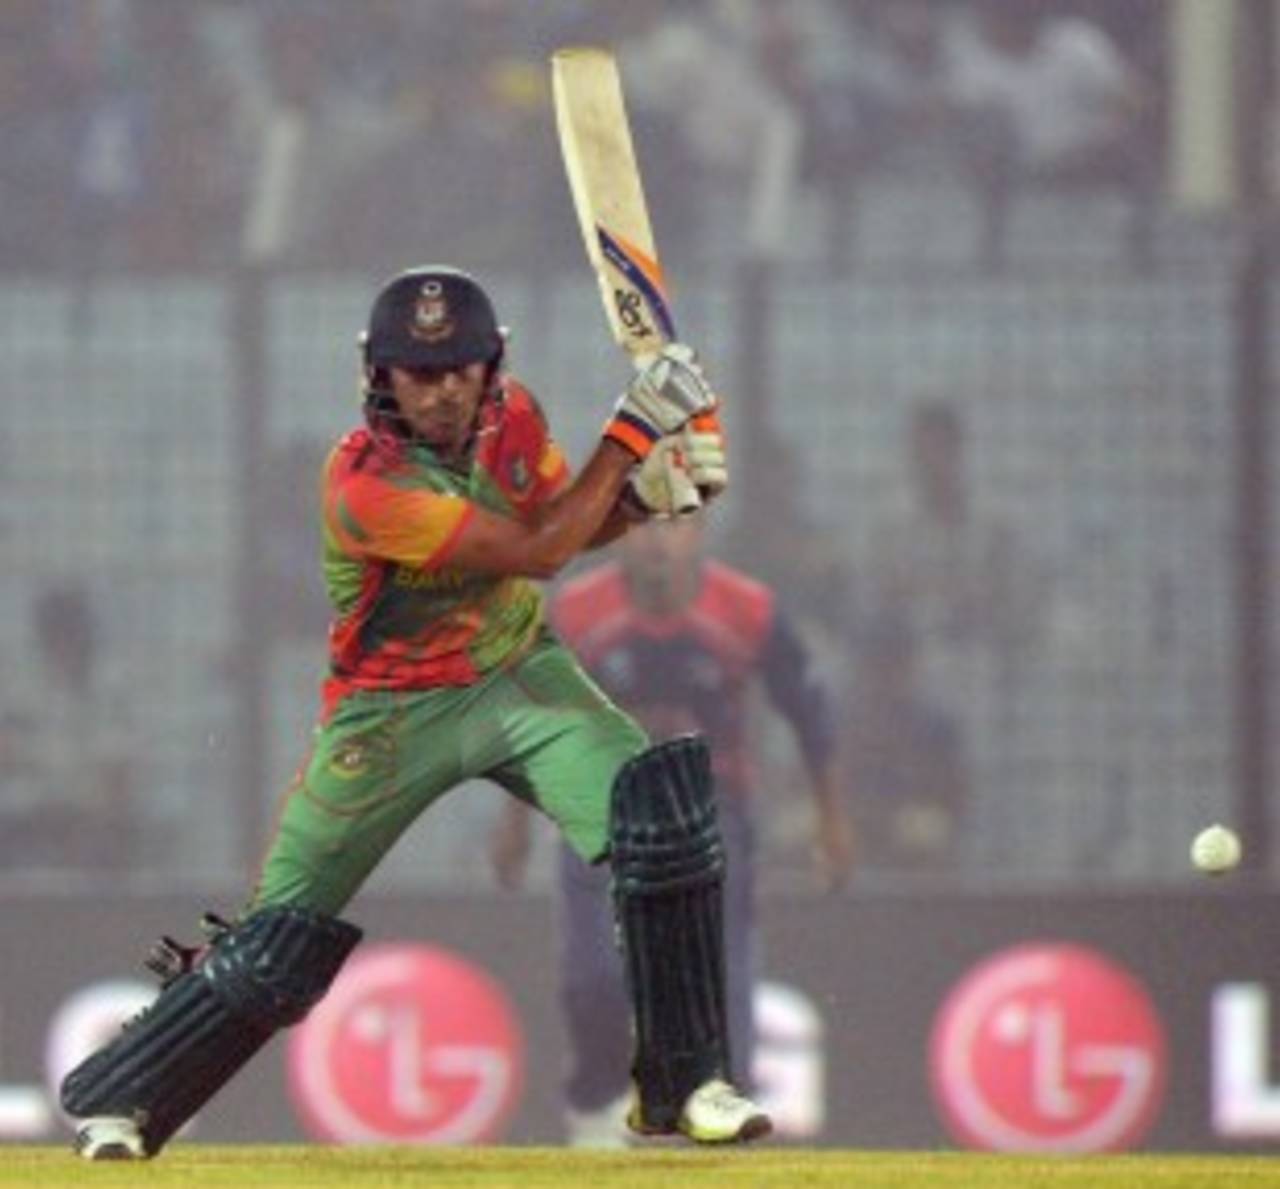 Anamul Haque scored a century in the first ODI against West Indies, but he averages just 9.12 in Test cricket&nbsp;&nbsp;&bull;&nbsp;&nbsp;AFP